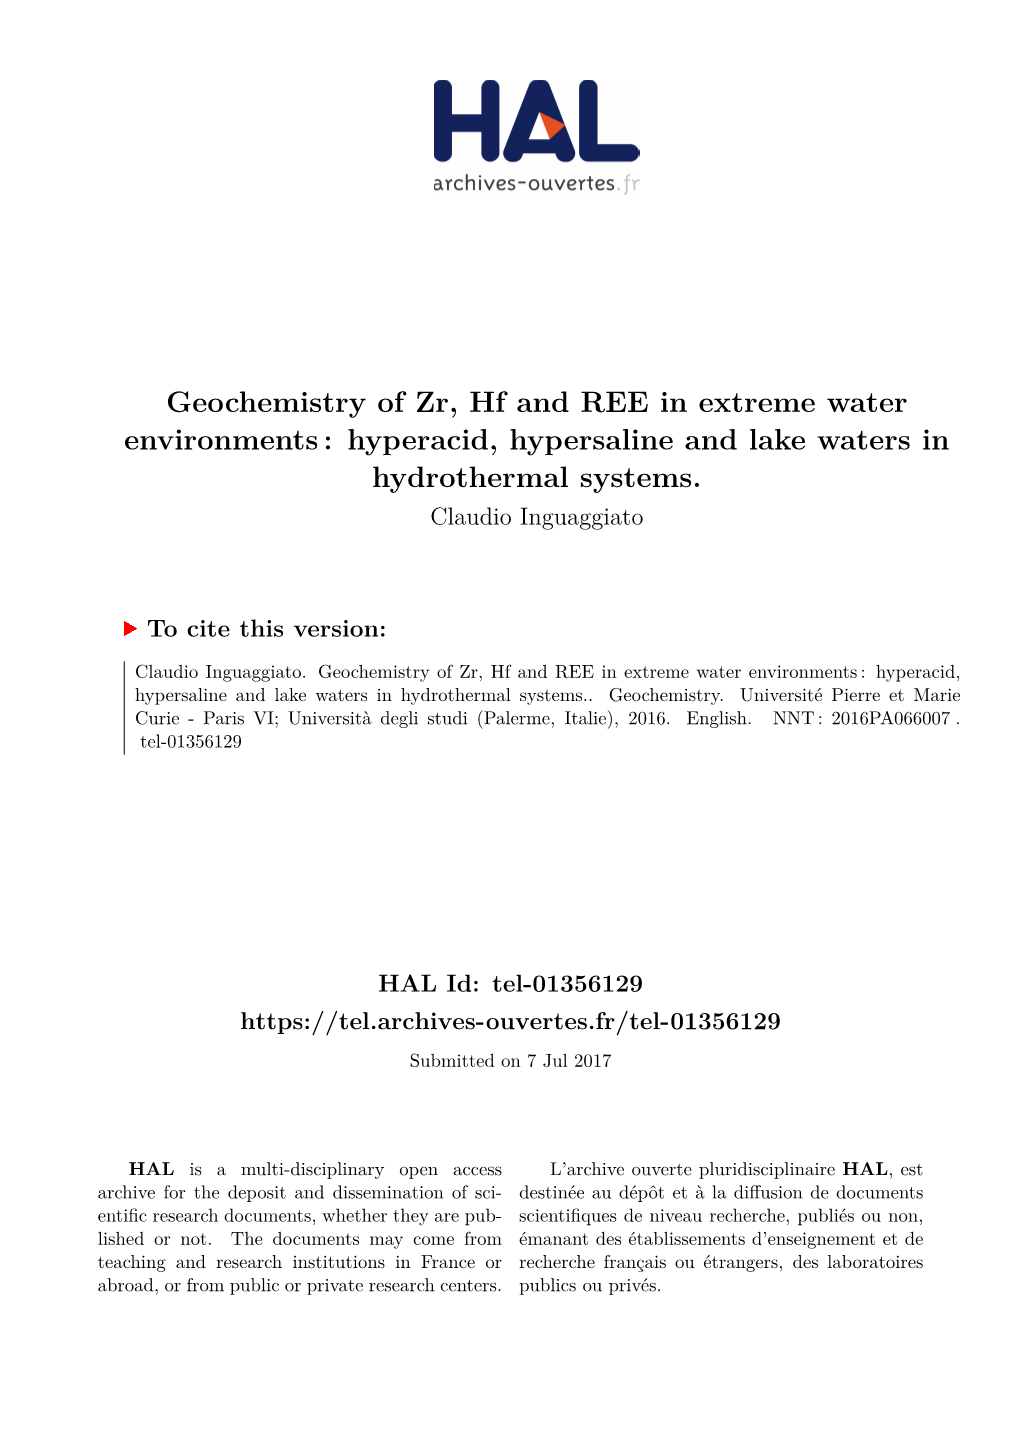 Geochemistry of Zr, Hf and REE in Extreme Water Environments : Hyperacid, Hypersaline and Lake Waters in Hydrothermal Systems